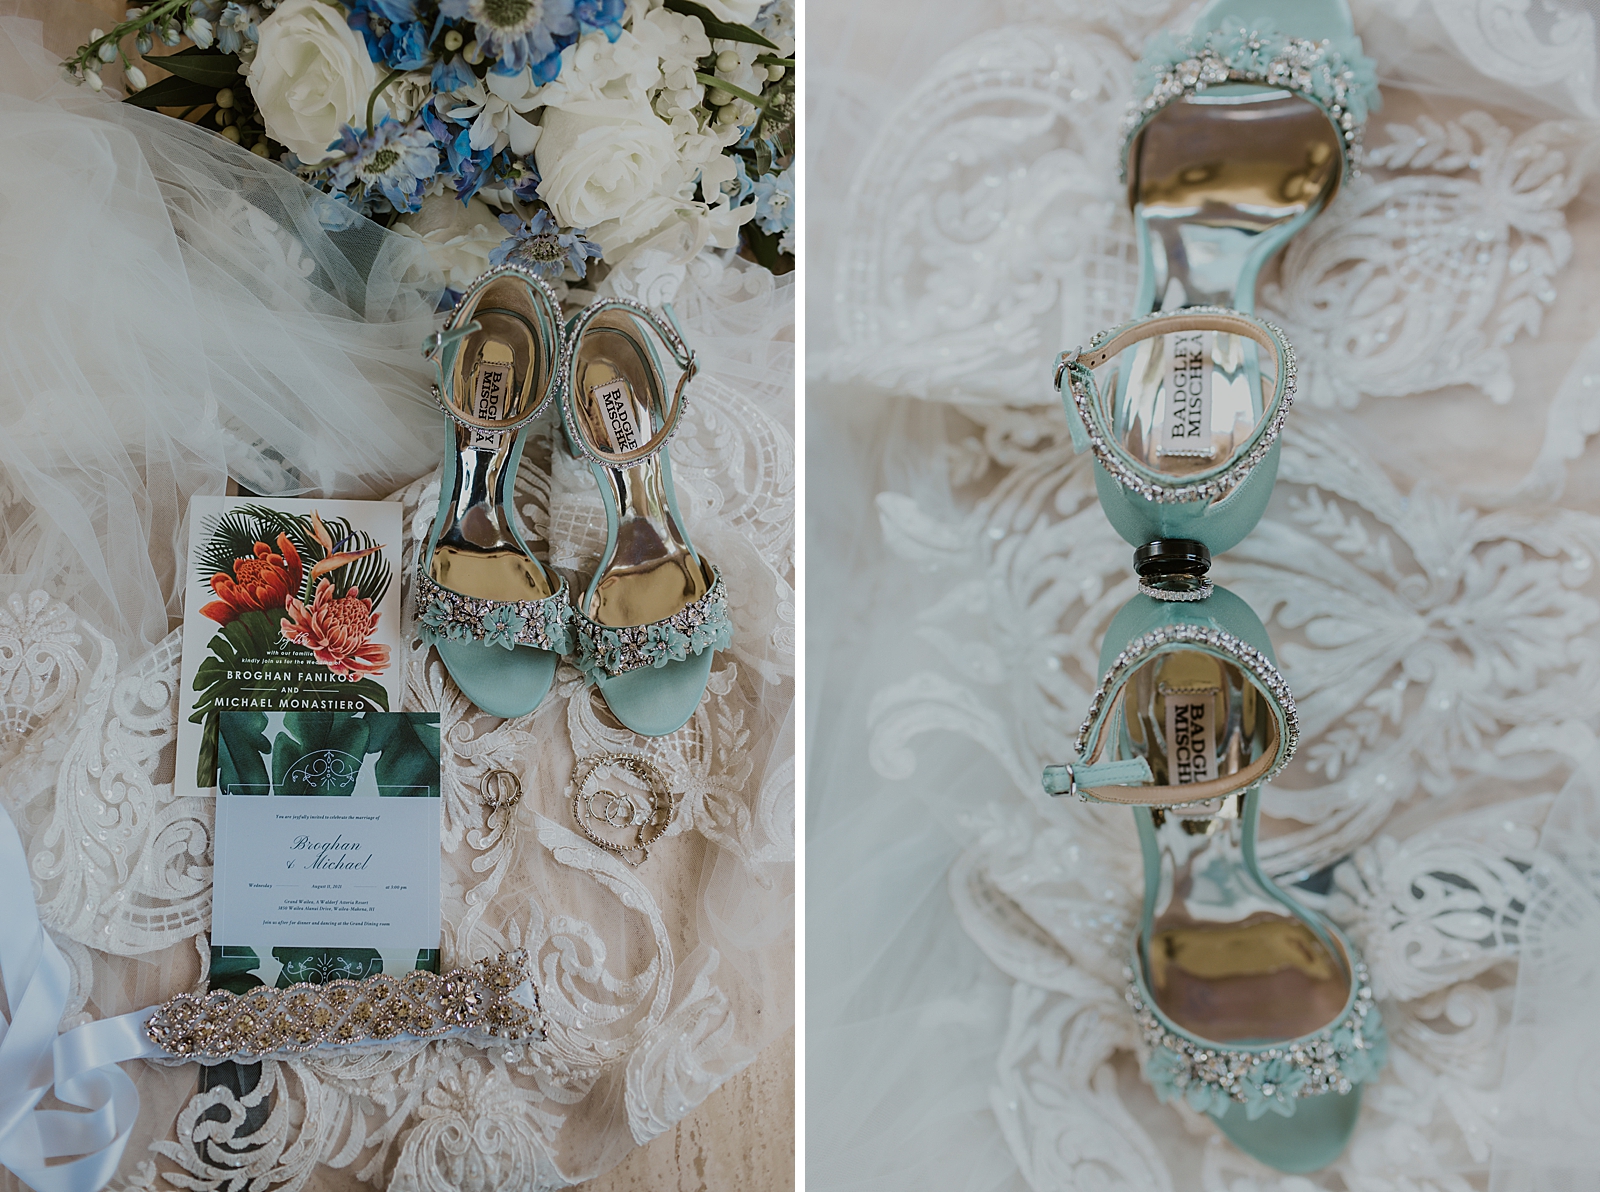 Detail shot of turquoise wedding heels and invitations on dress